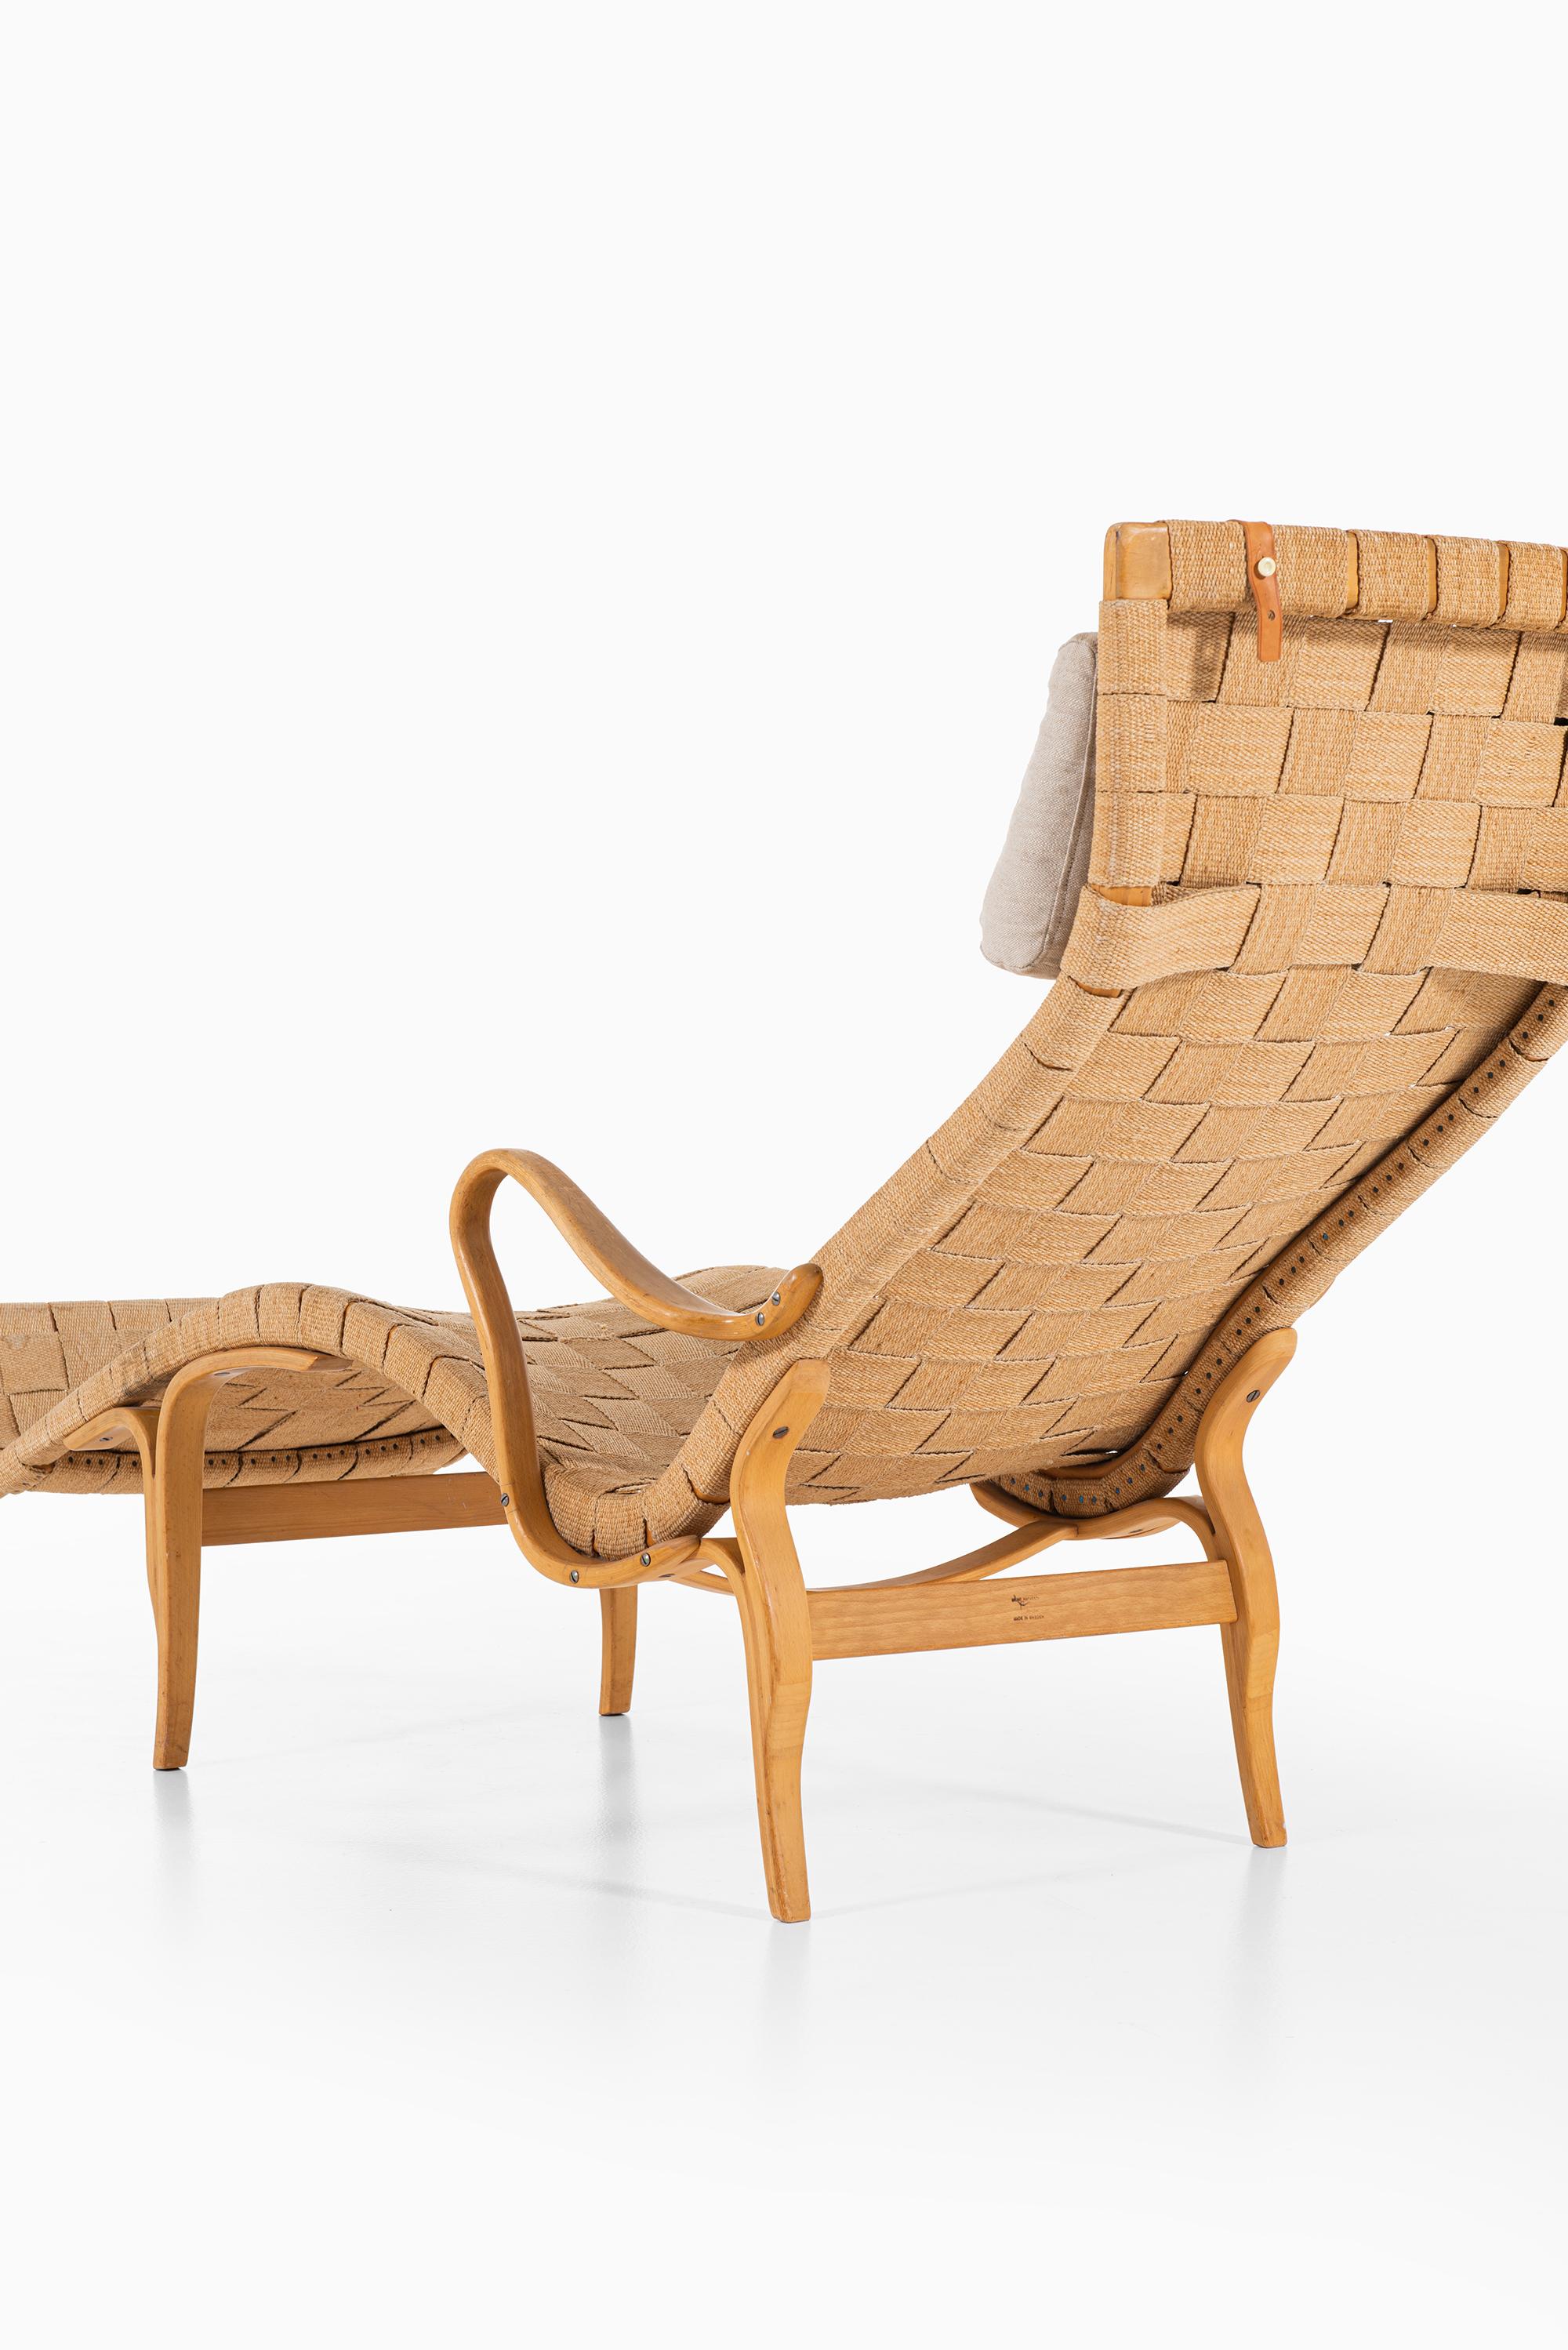 Canvas Bruno Mathsson Lounge Chair Model Pernilla 3 / T-108 by Karl Mathsson in Sweden For Sale